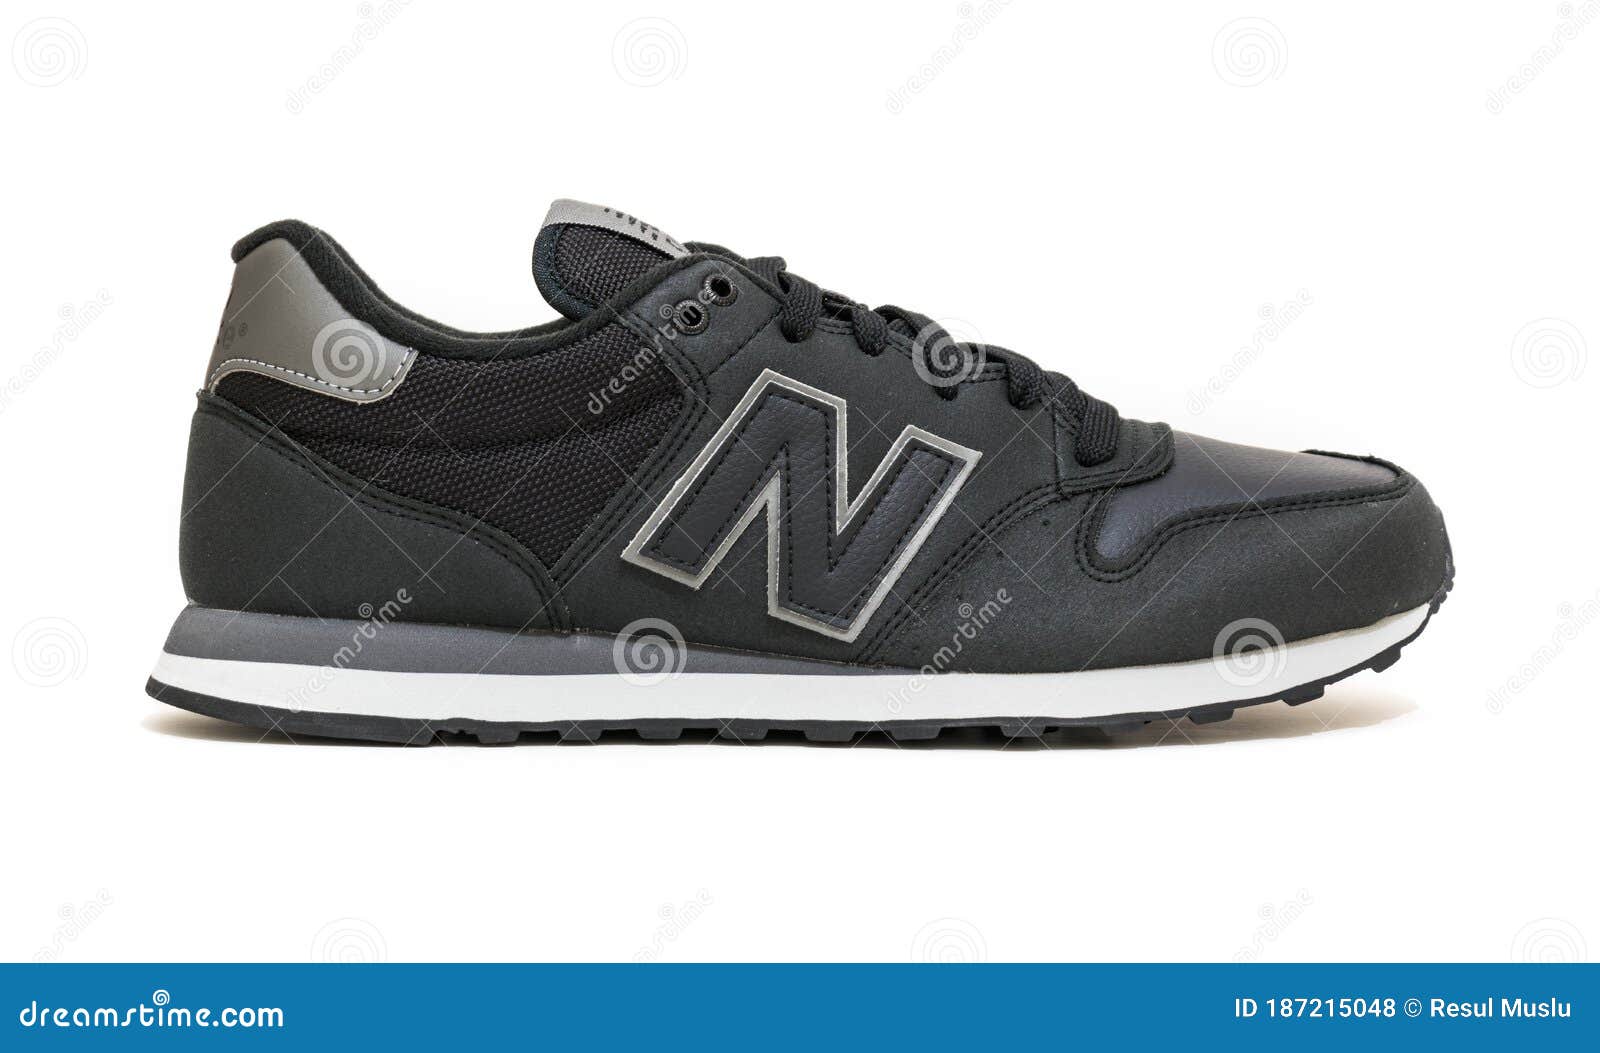 new new balance shoes 2016